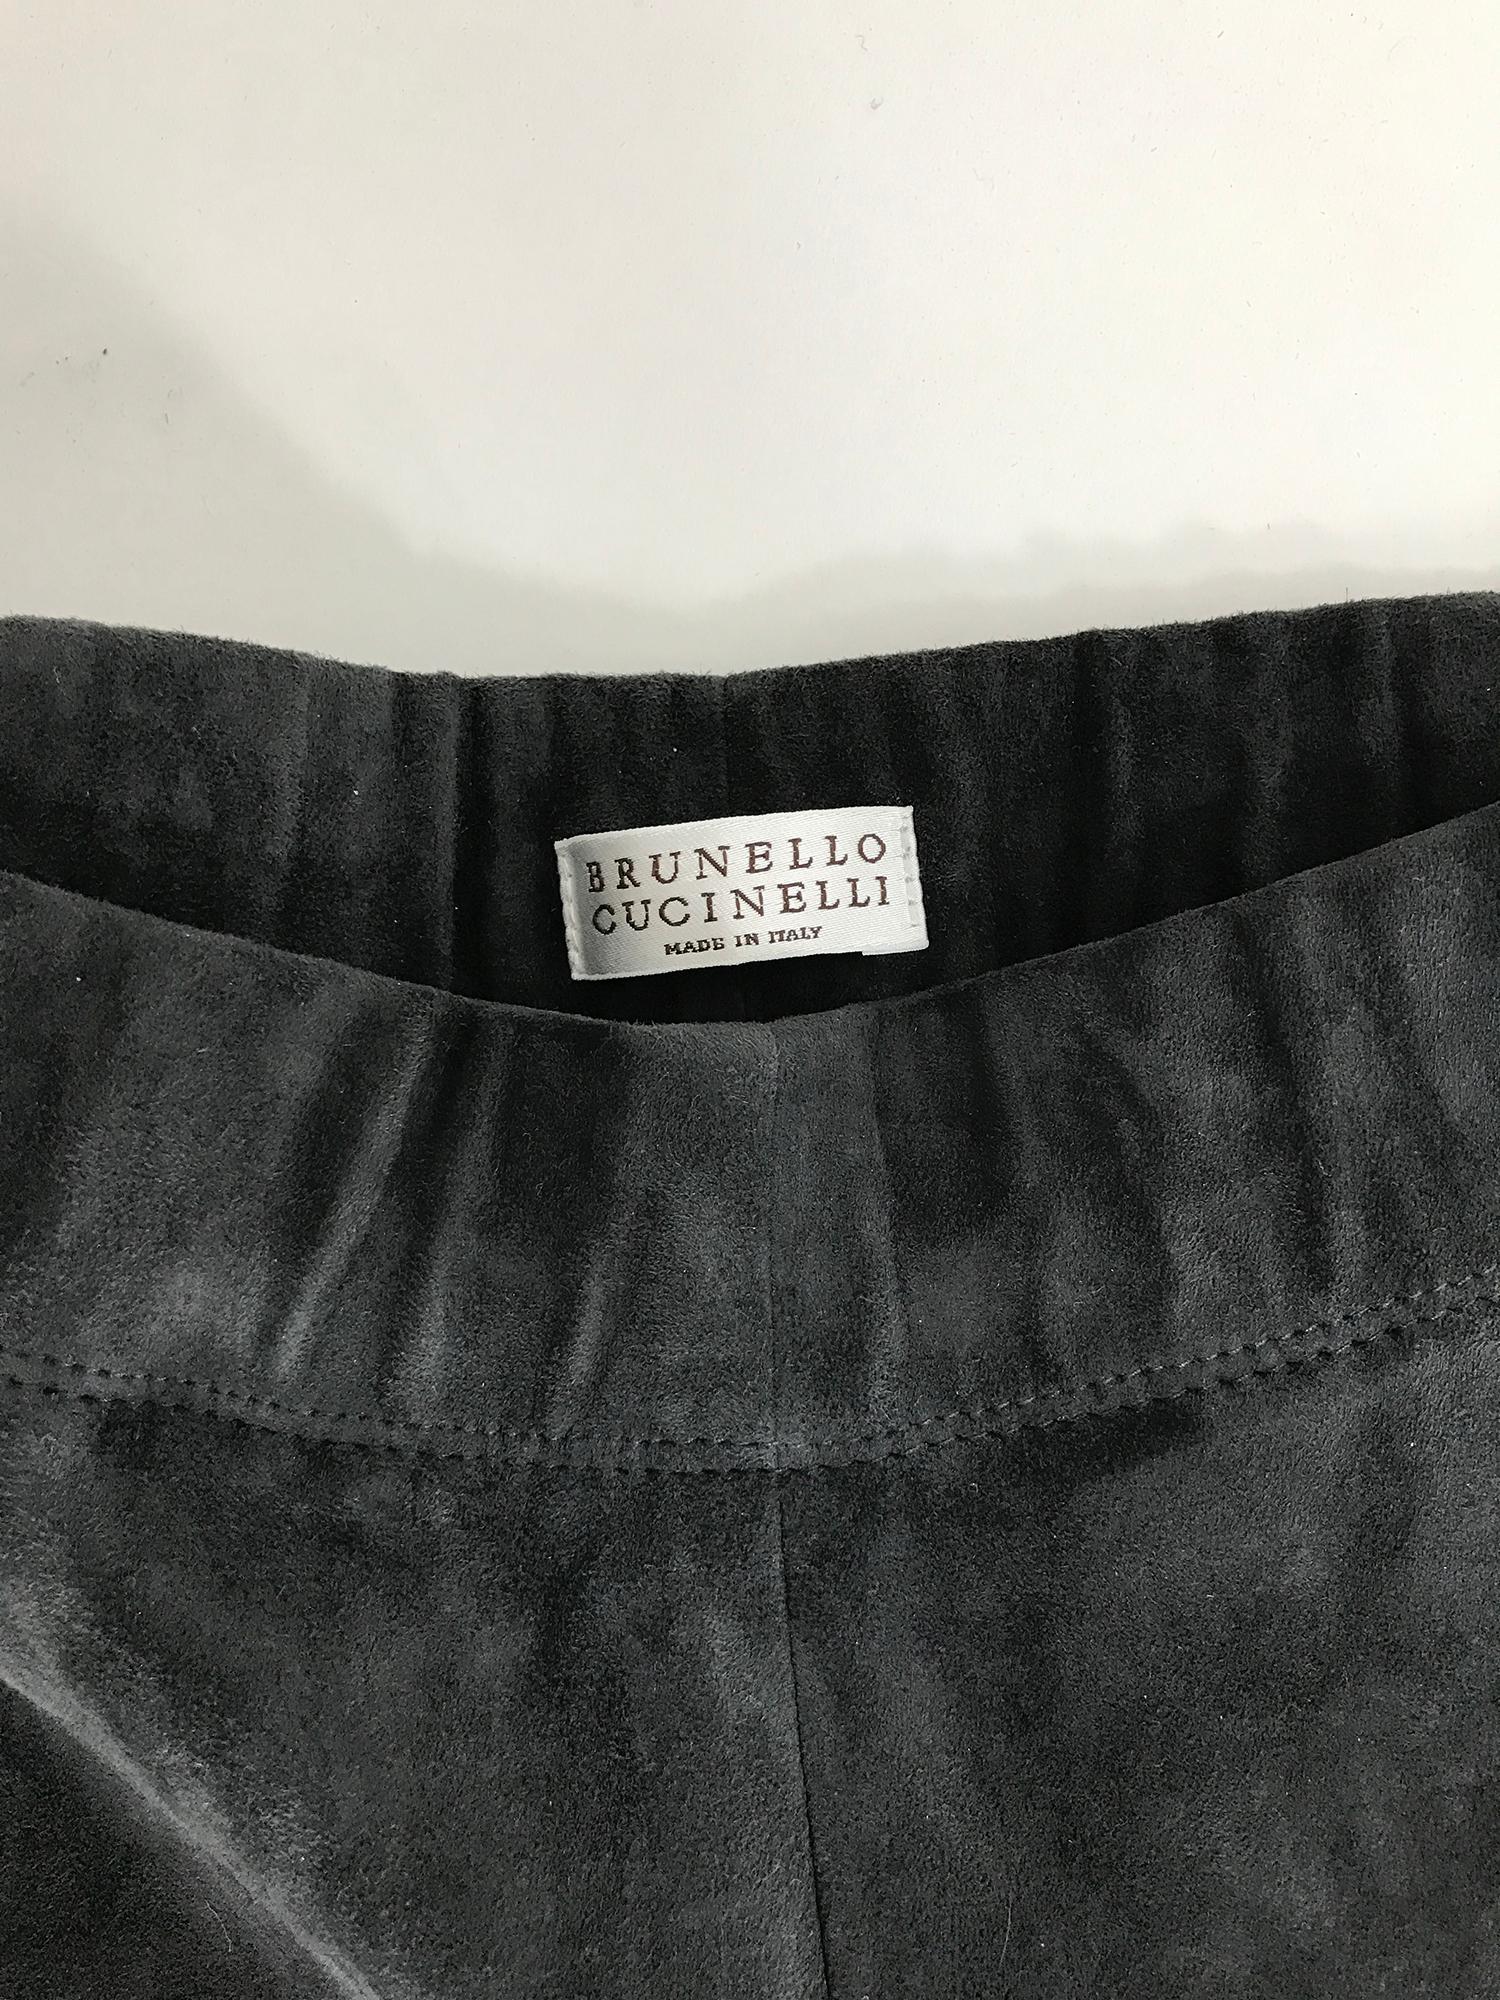 Brunello Cucinelli grey suede stretch leggings. Pull on leggings in the softest suede with a cased elastic waist. Marked size 4.

     In excellent wearable condition.  All our clothing is dry cleaned and inspected for condition and is ready to